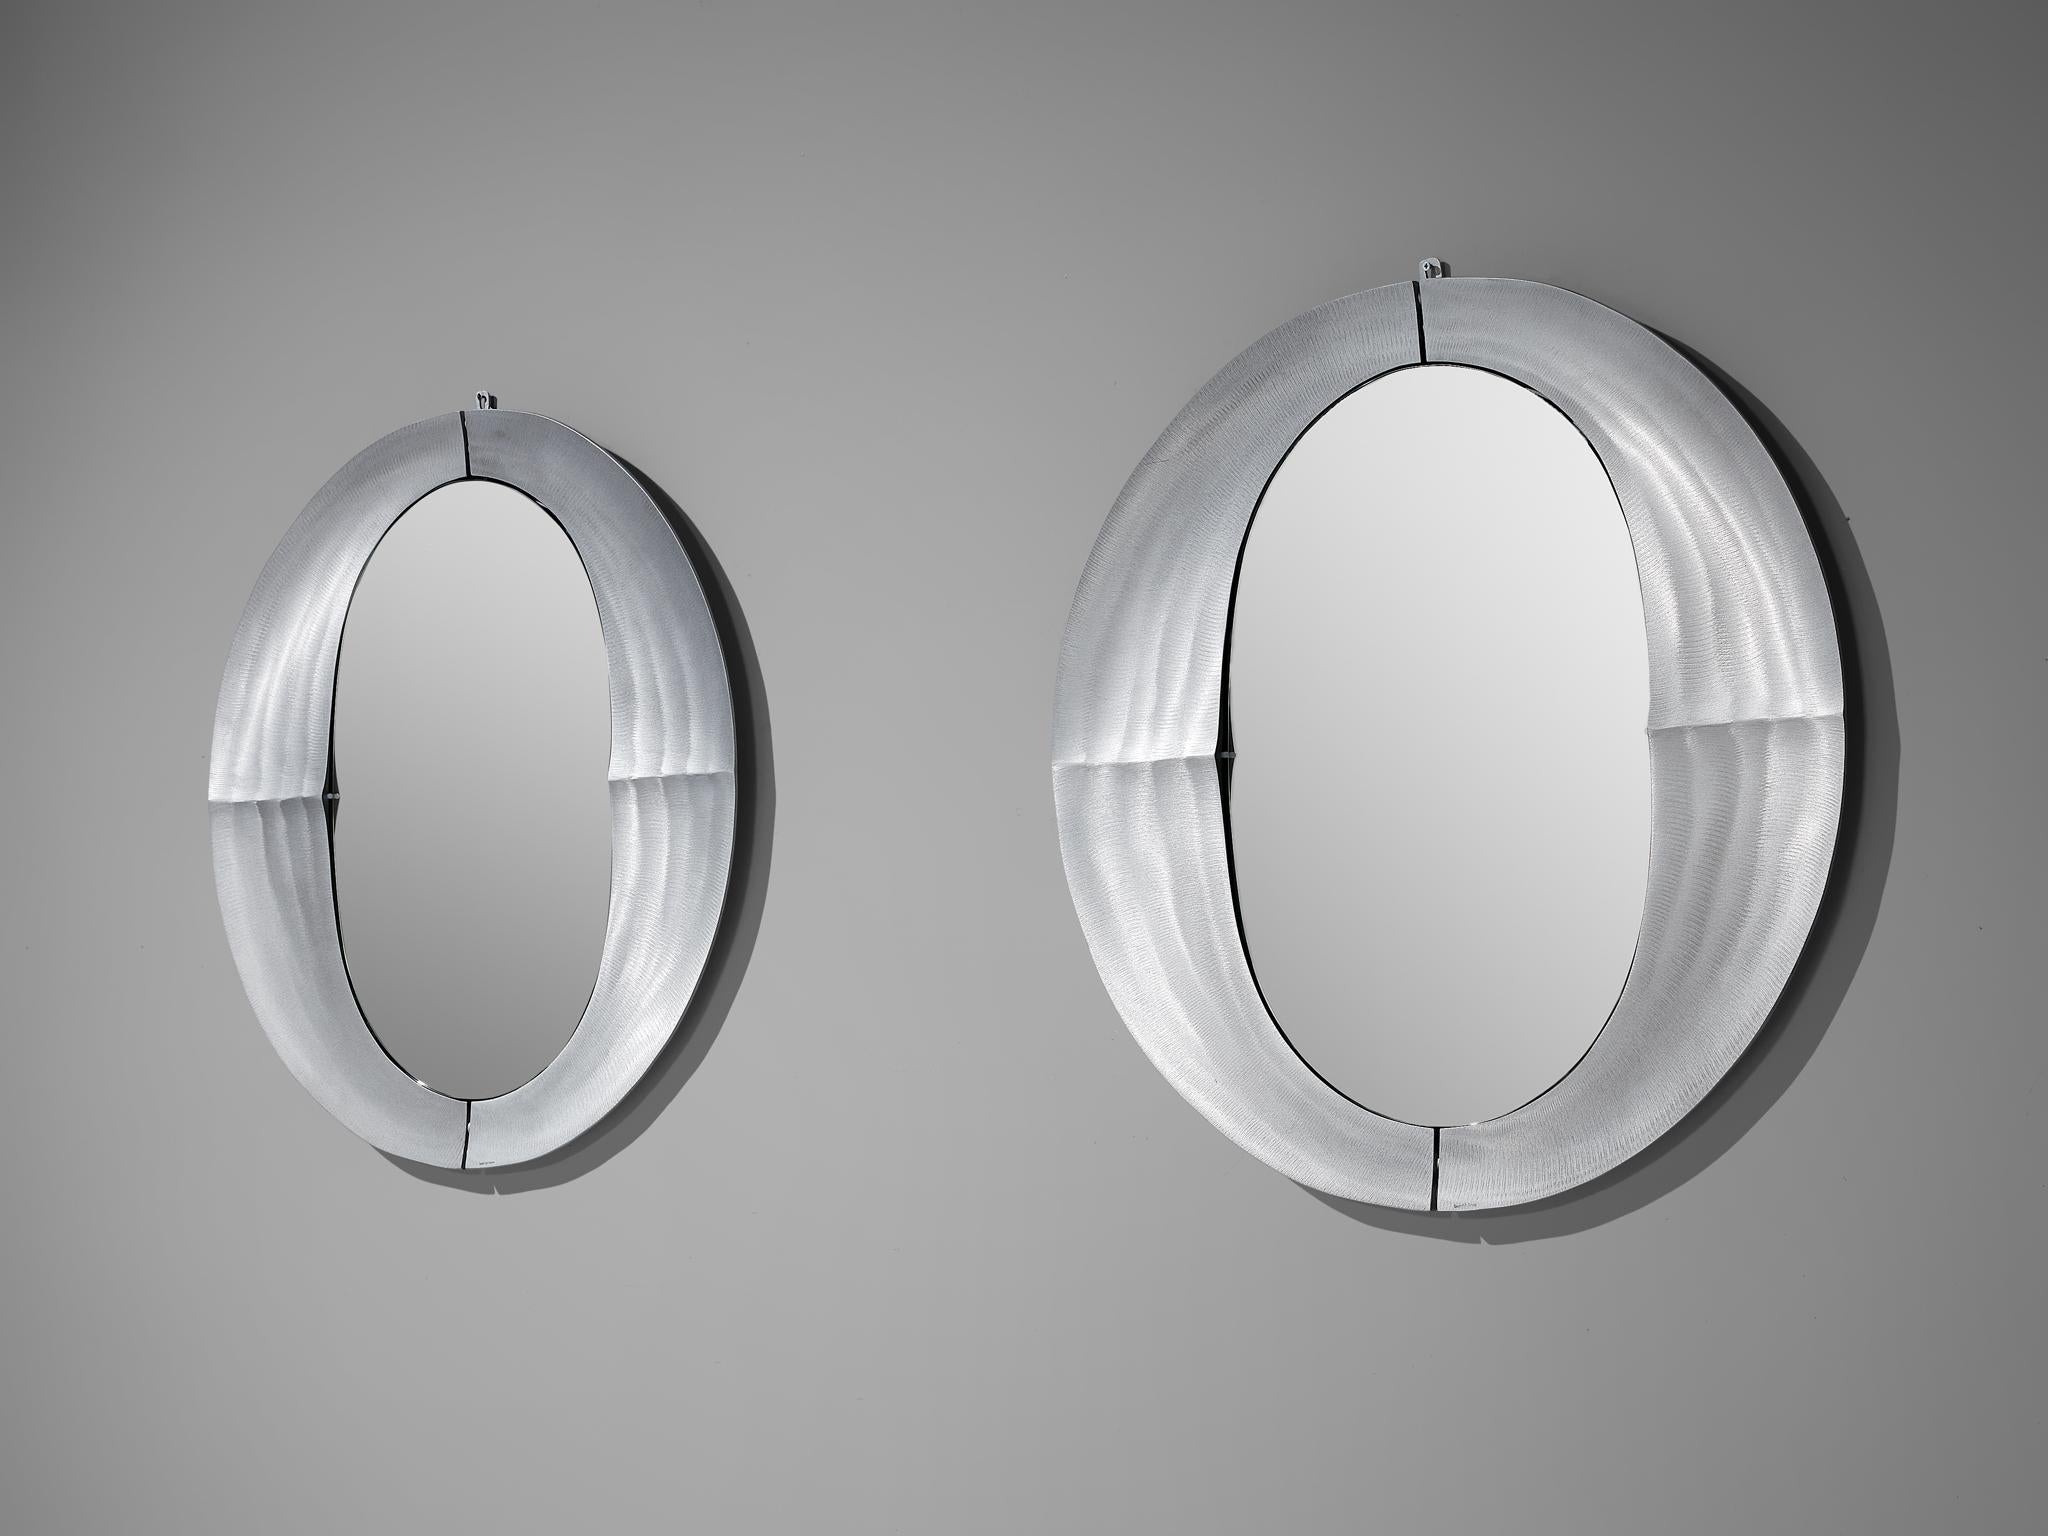 Lorenzo Burchiellaro, wall mirrors model ‘Cuccaro’, aluminum, glass, Italy, 1970s

Stunning wall mirrors by the studio of Italian sculptor Lorenzo Burchiellaro. The oval shaped mirrored glass is surrounded by a round frame that differs in width.